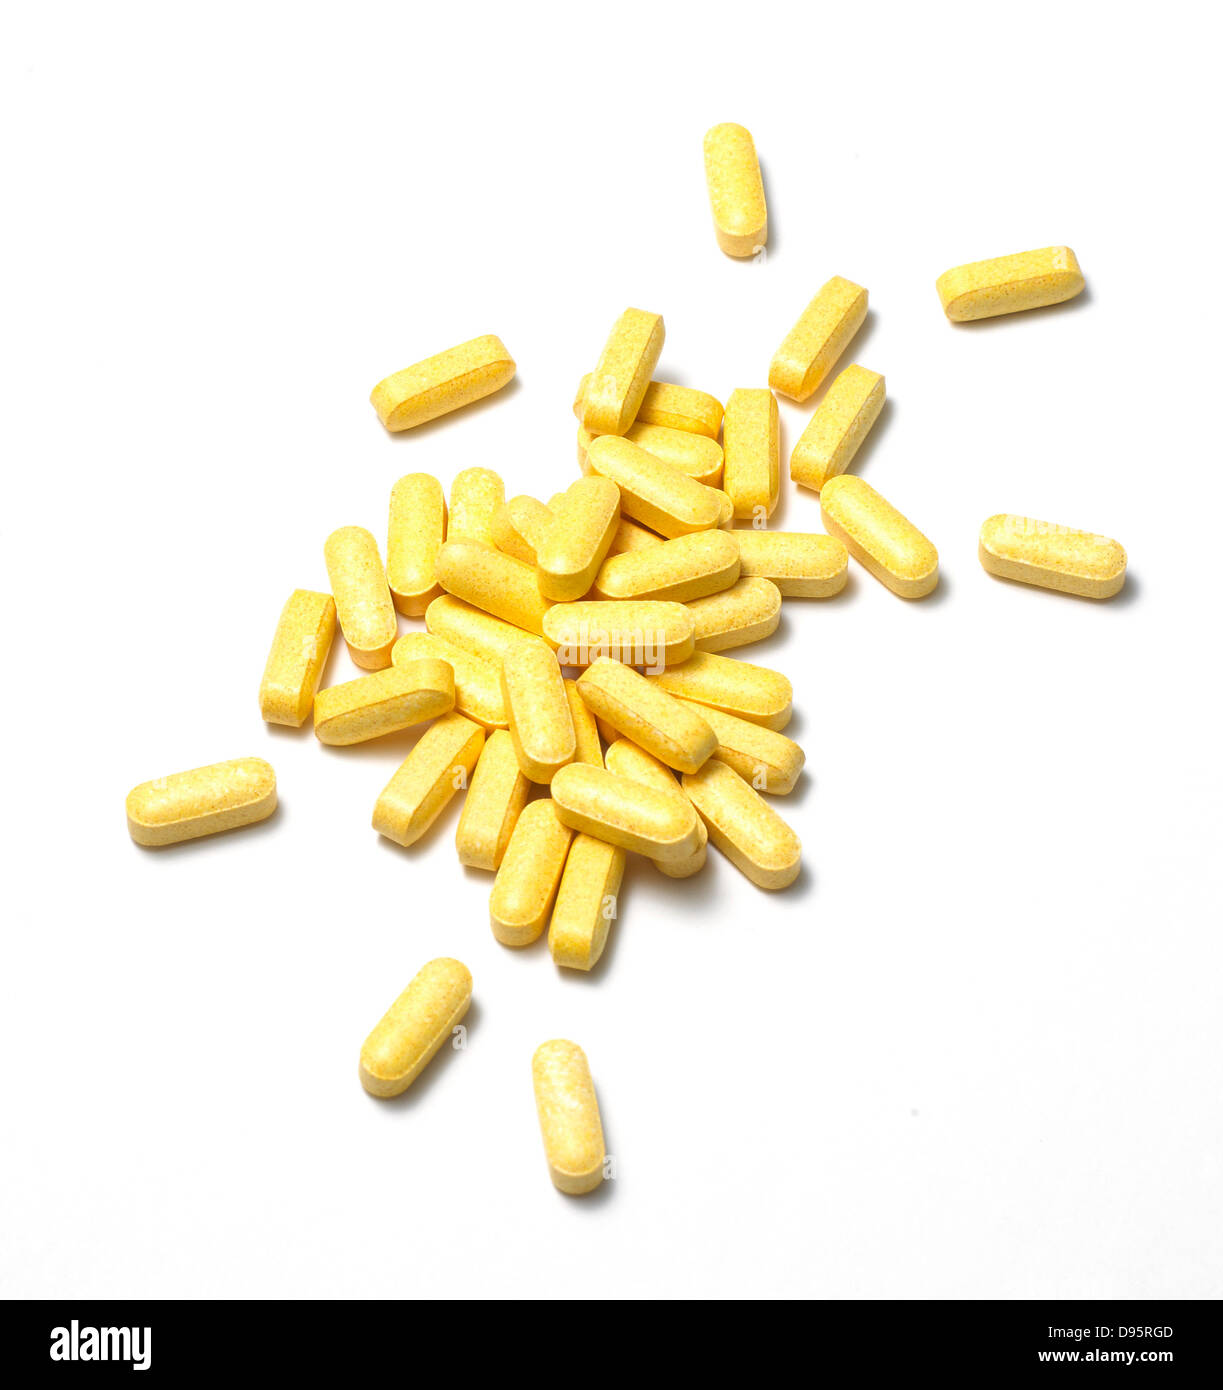 yellow pills cut out onto a white background Stock Photo